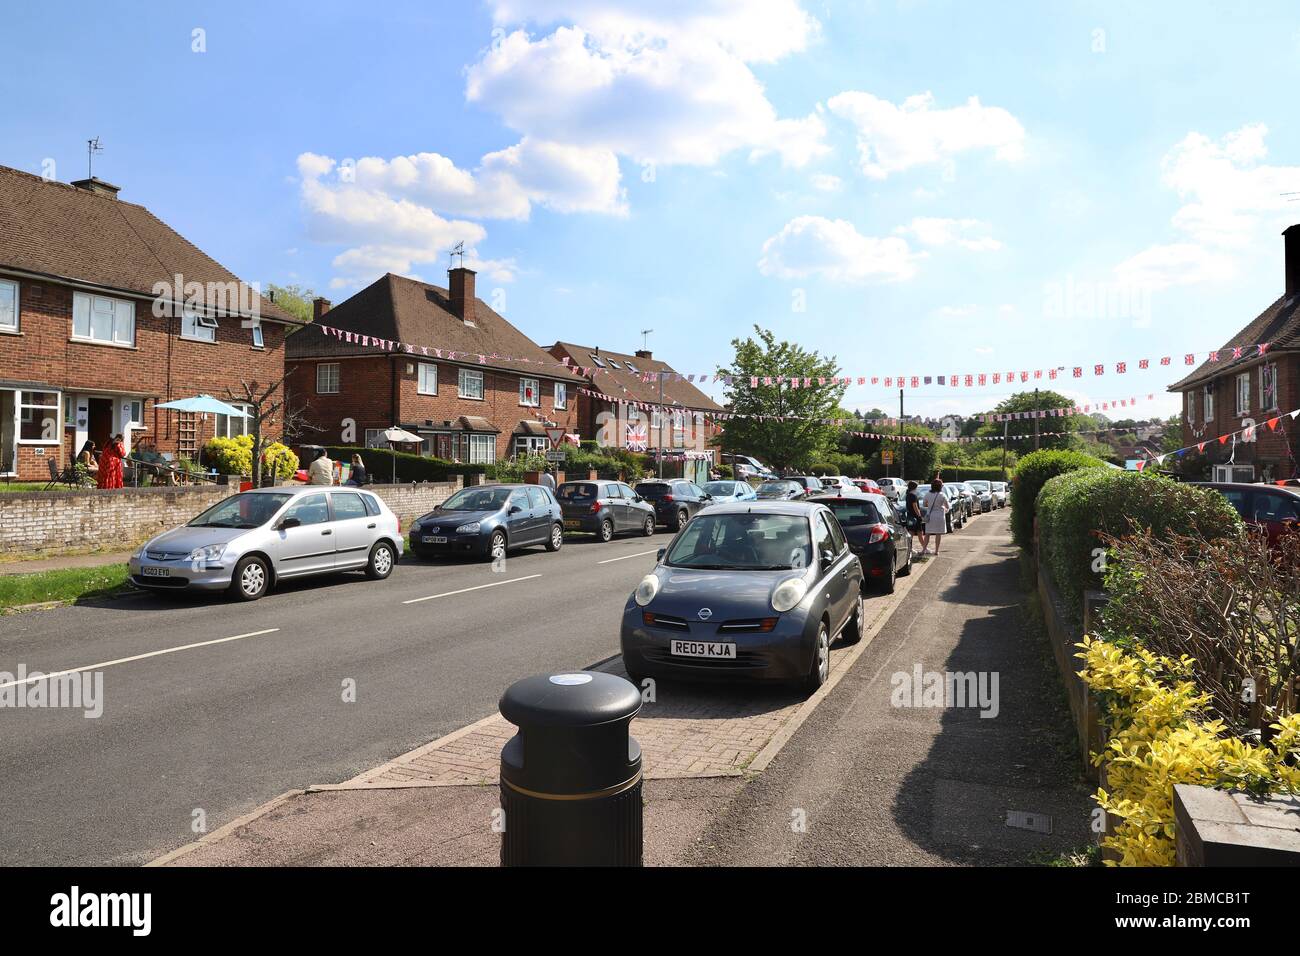 Hertfordshire, UK. 8th May 2020. Residents of Hertfordshire, UK, celebrate VE Day 2020 75th Anniversary with street parties social distancing and isolation, decorating their homes and holding tea parties outside displaying union jack flags, photographs and medals. Credit: Ayeesha Walsh/Alamy Live News Stock Photo